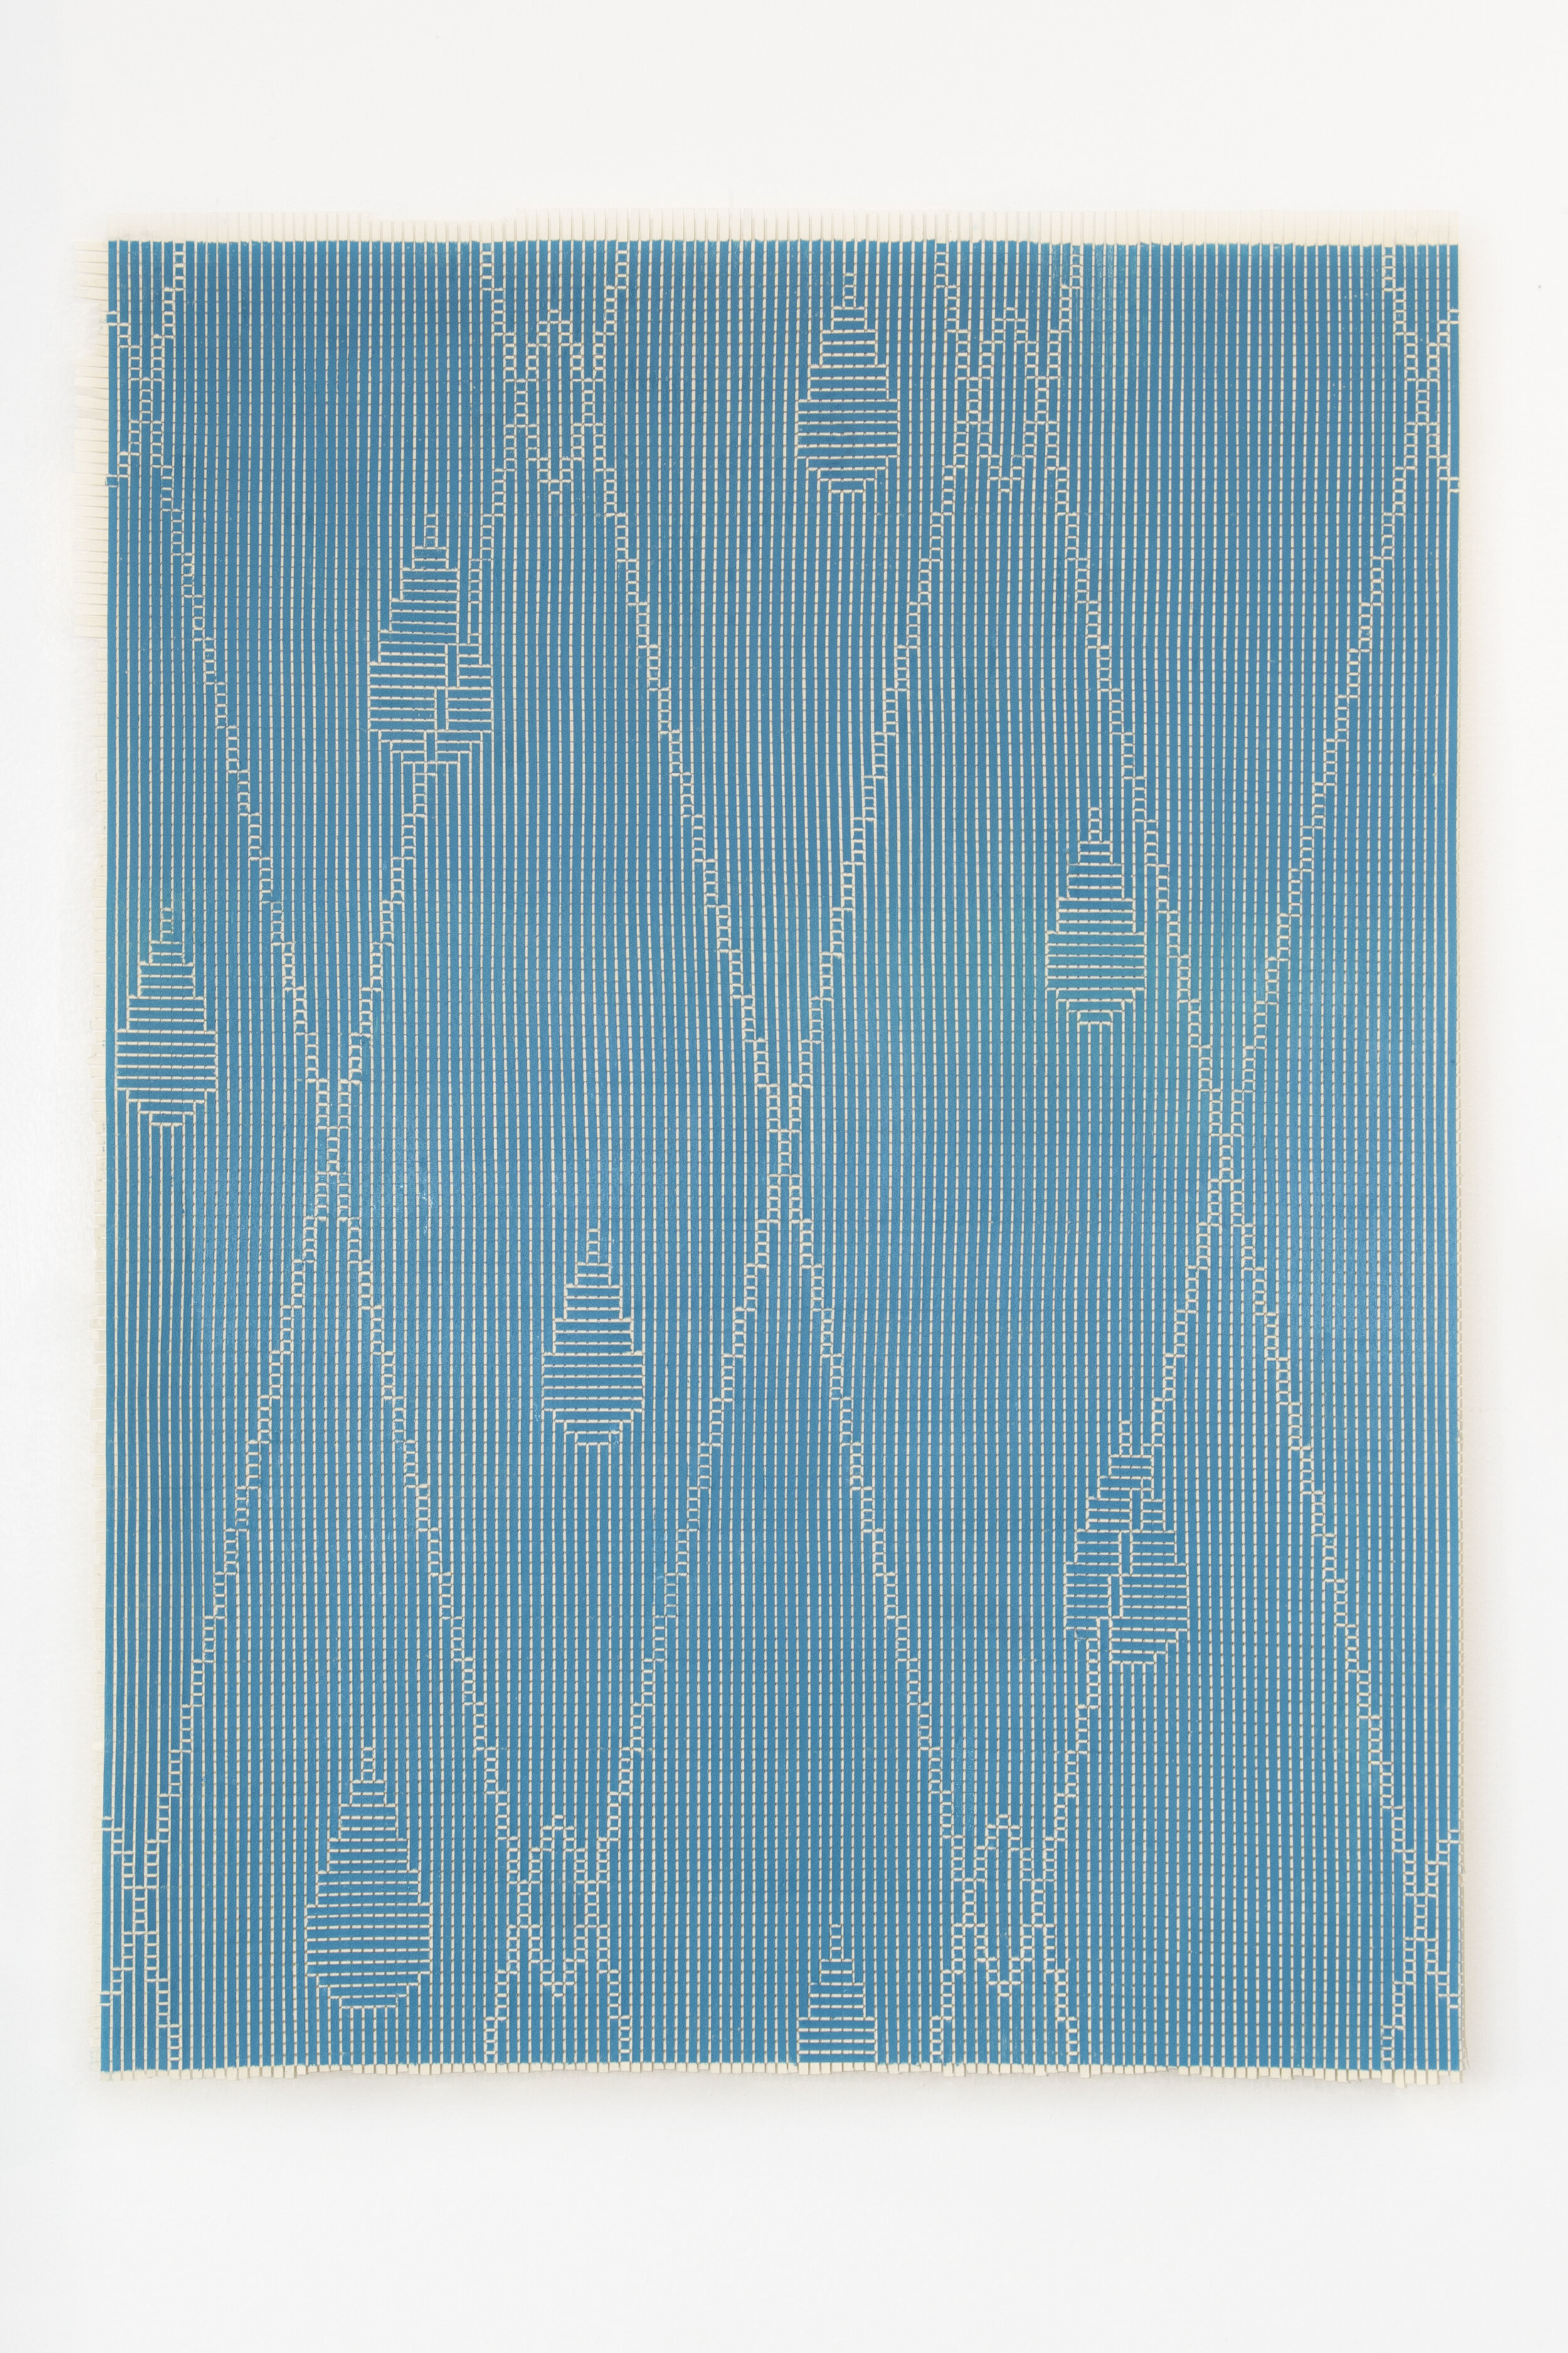  Chasing Waterfalls 02 20x30 in.  Intaglio ink on woven paper  